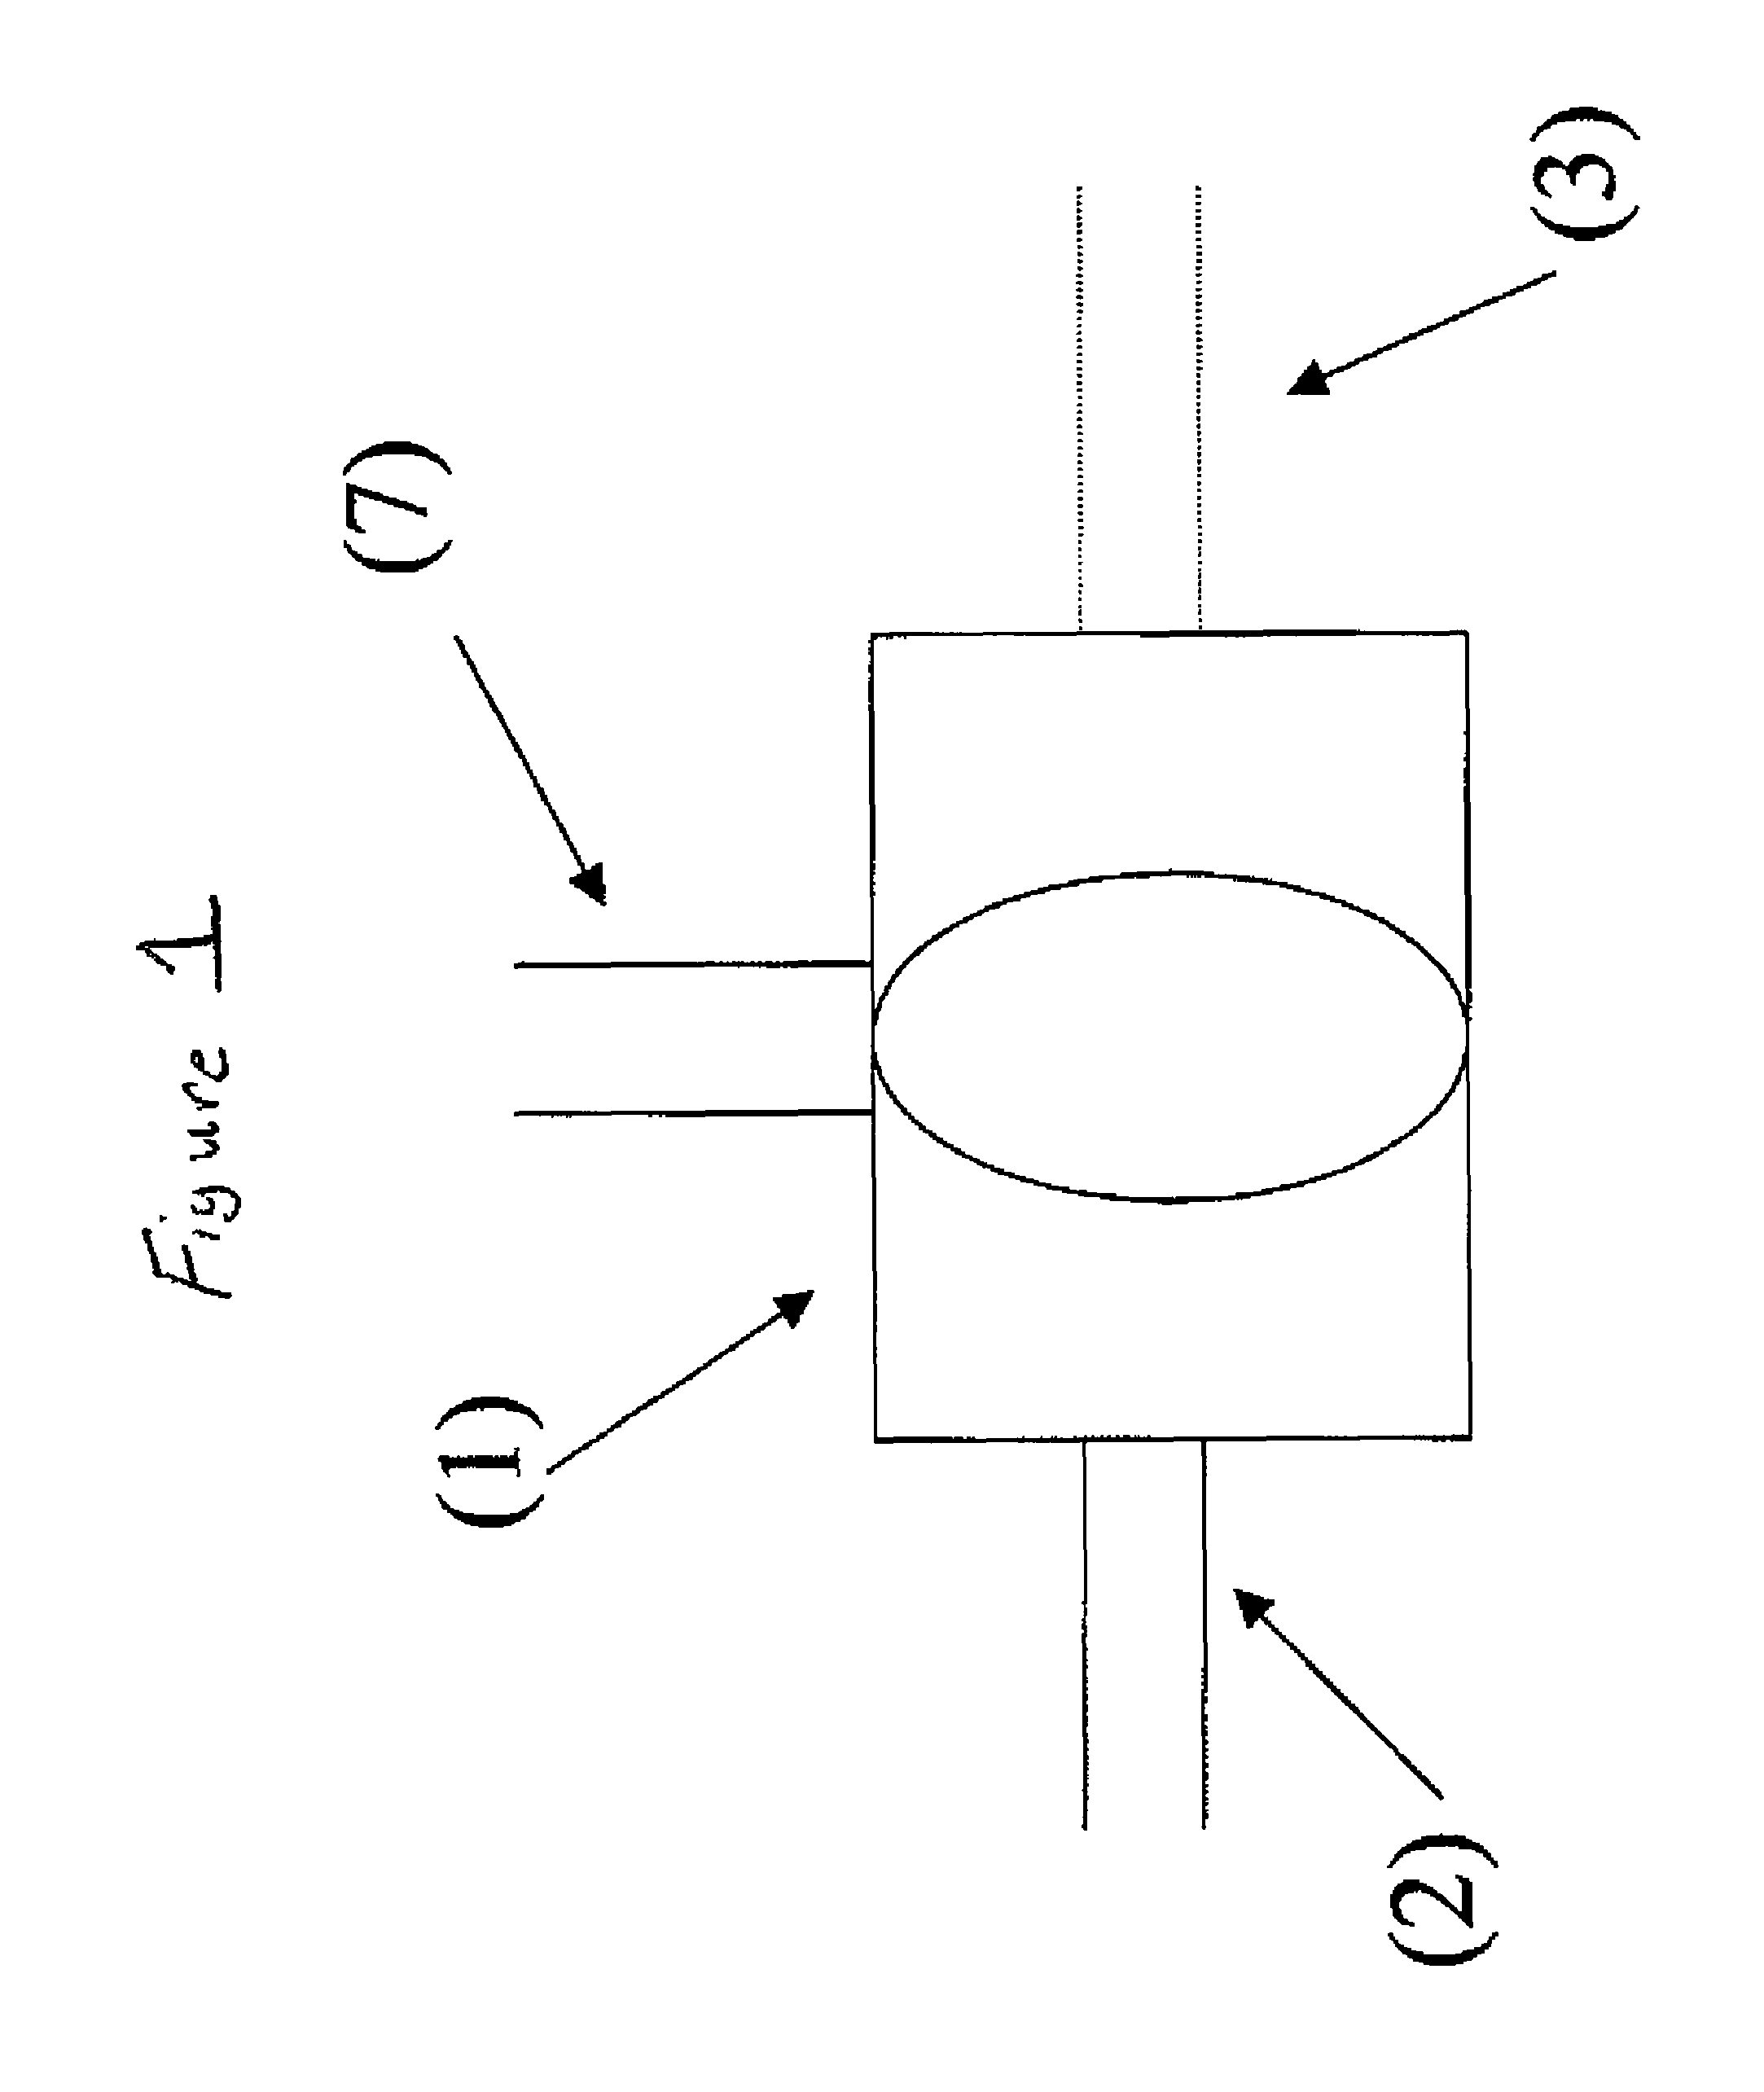 Method of monitoring microbiological activity in process streams